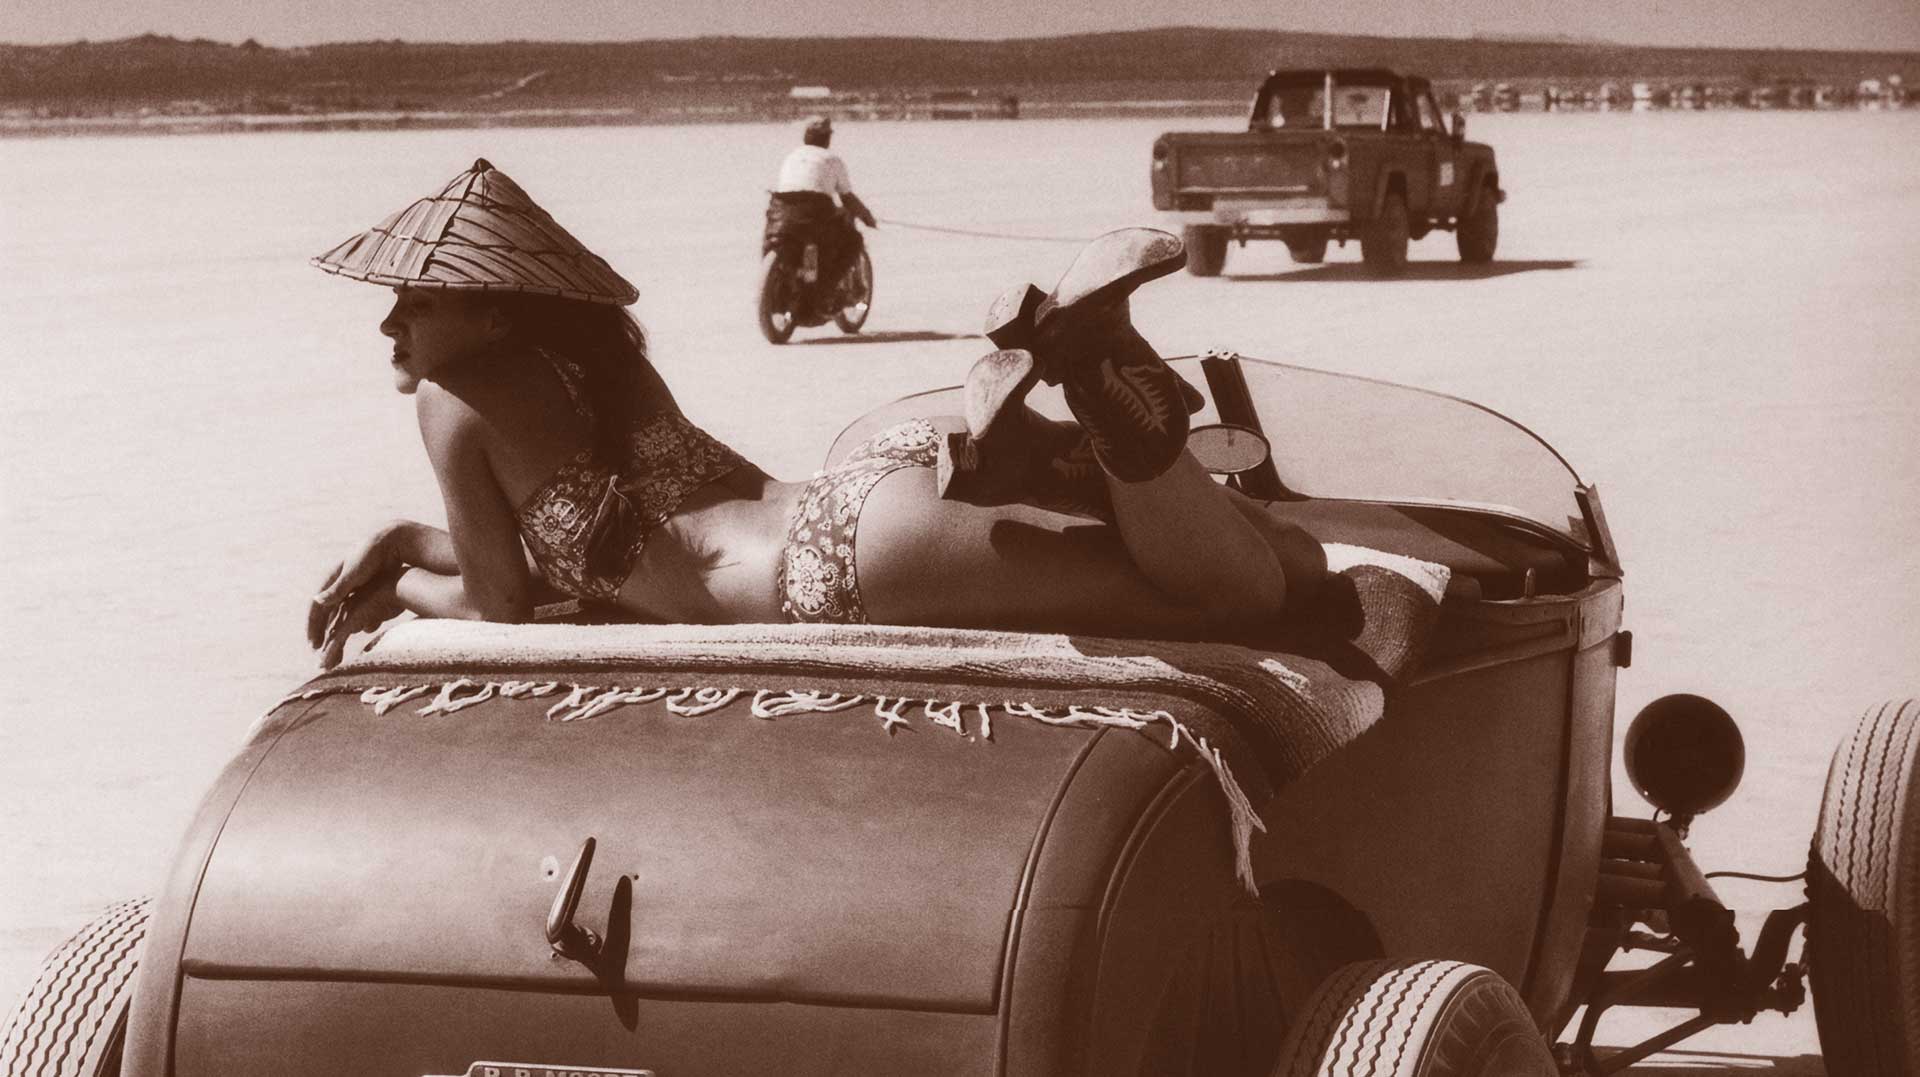 Image of woman laying across a hot rot in the Bonneville Salt Flats